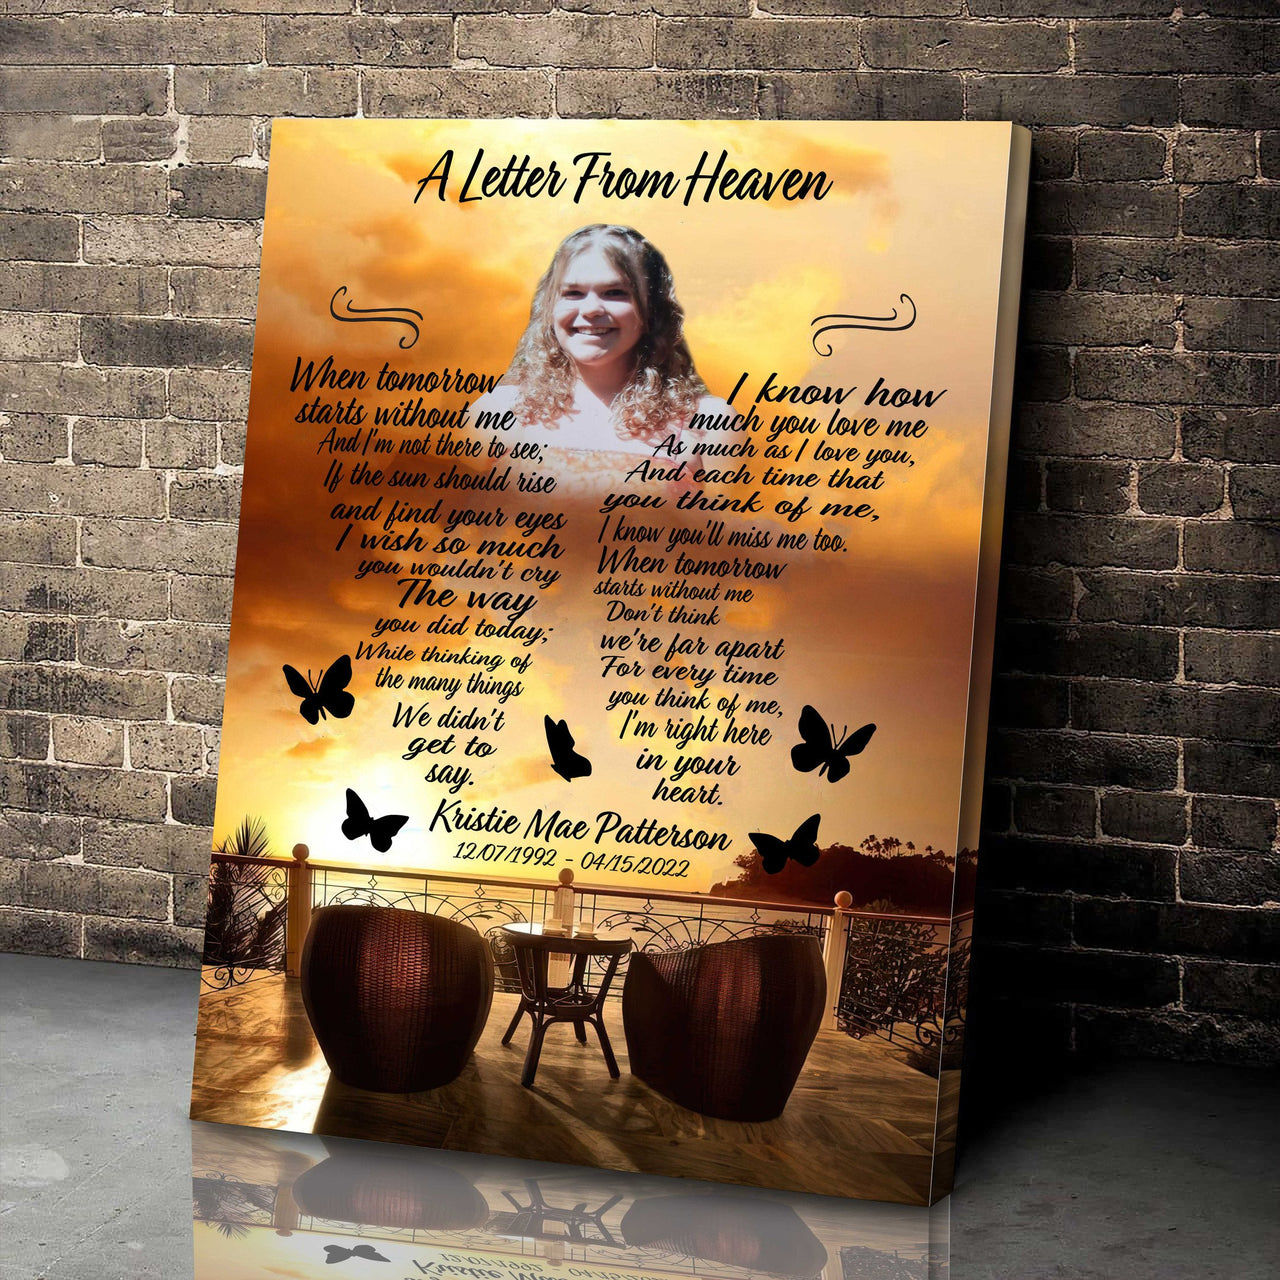 Personalized Dock Water, Lake House Memorial Canvas, As I sit in heaven Wall Art for Mom, Daughter